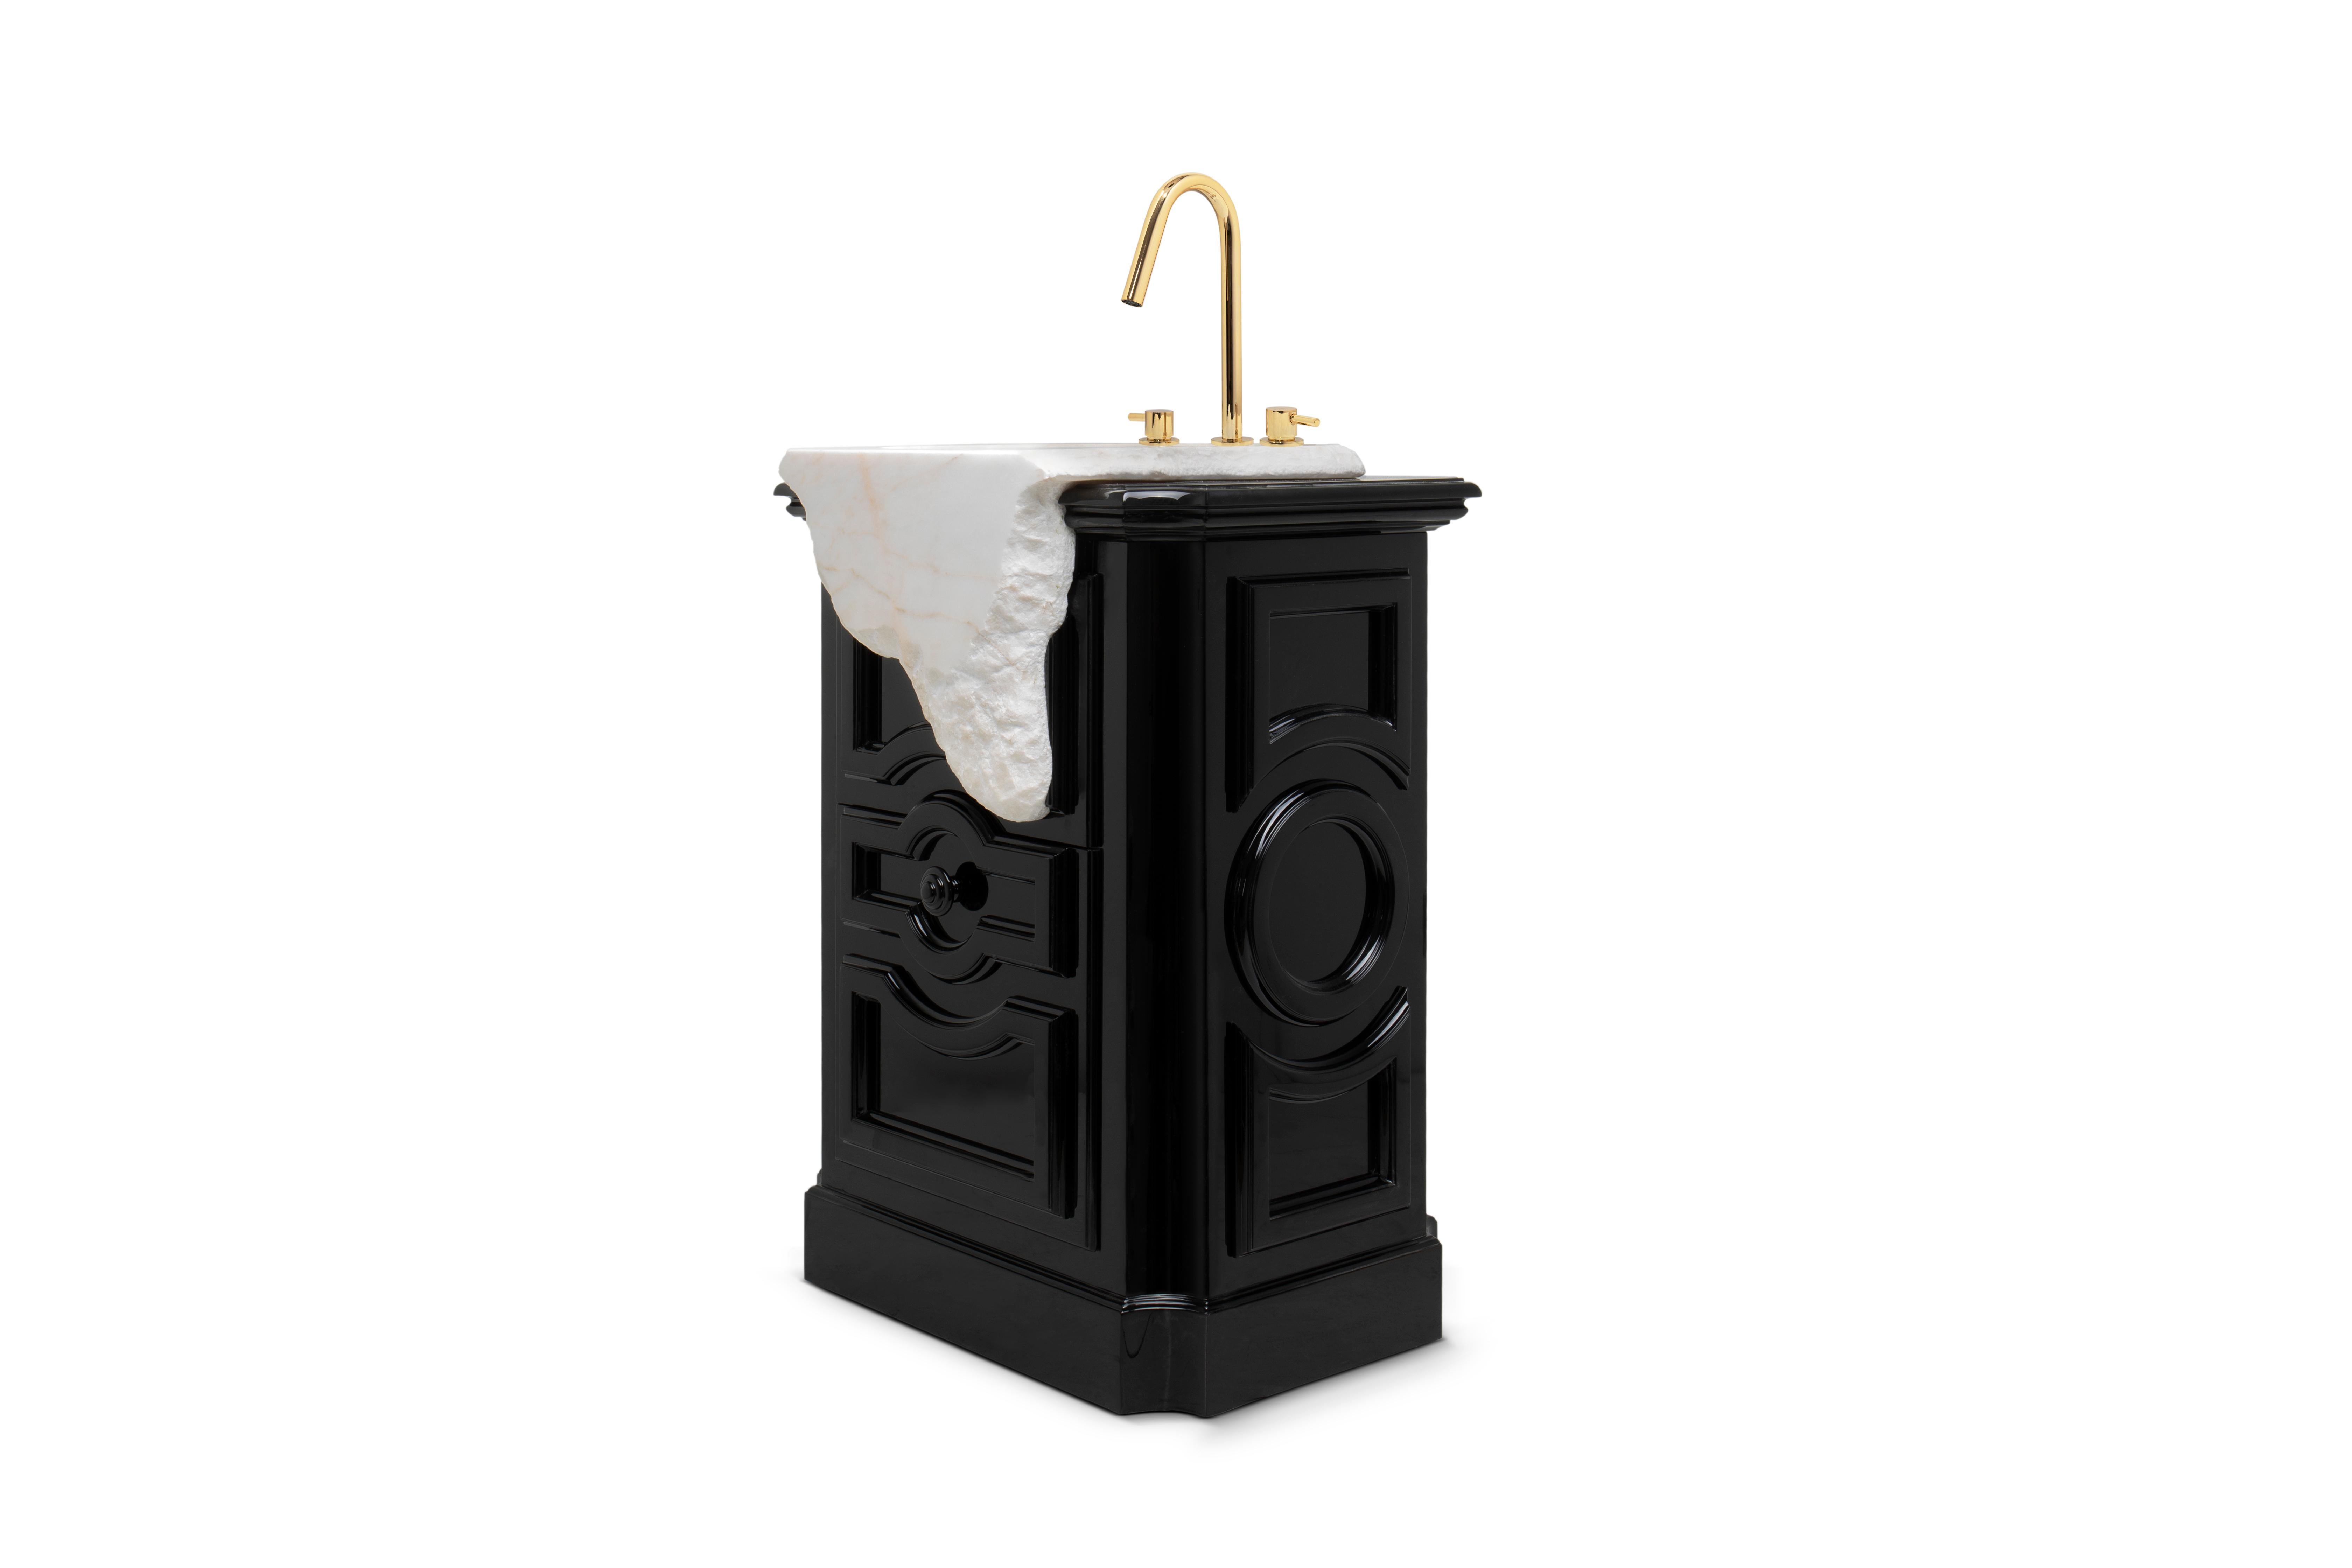 The melted marble look of the Petra freestanding takes us to the City of Petra where buildings are carved directly in the stone cliffs. By adding this freestanding to your bathroom, it is a sure guarantee of luxurious and exquisite environment